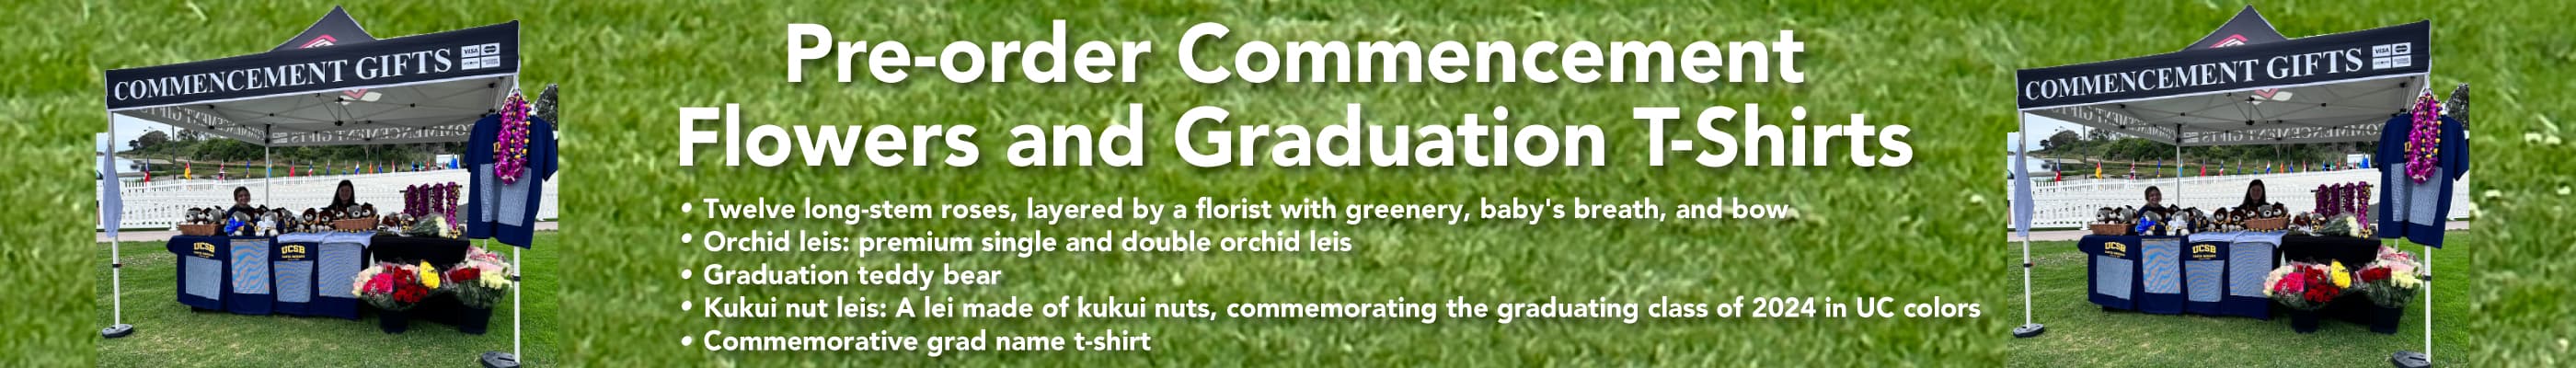 Pre-order commencement flowers